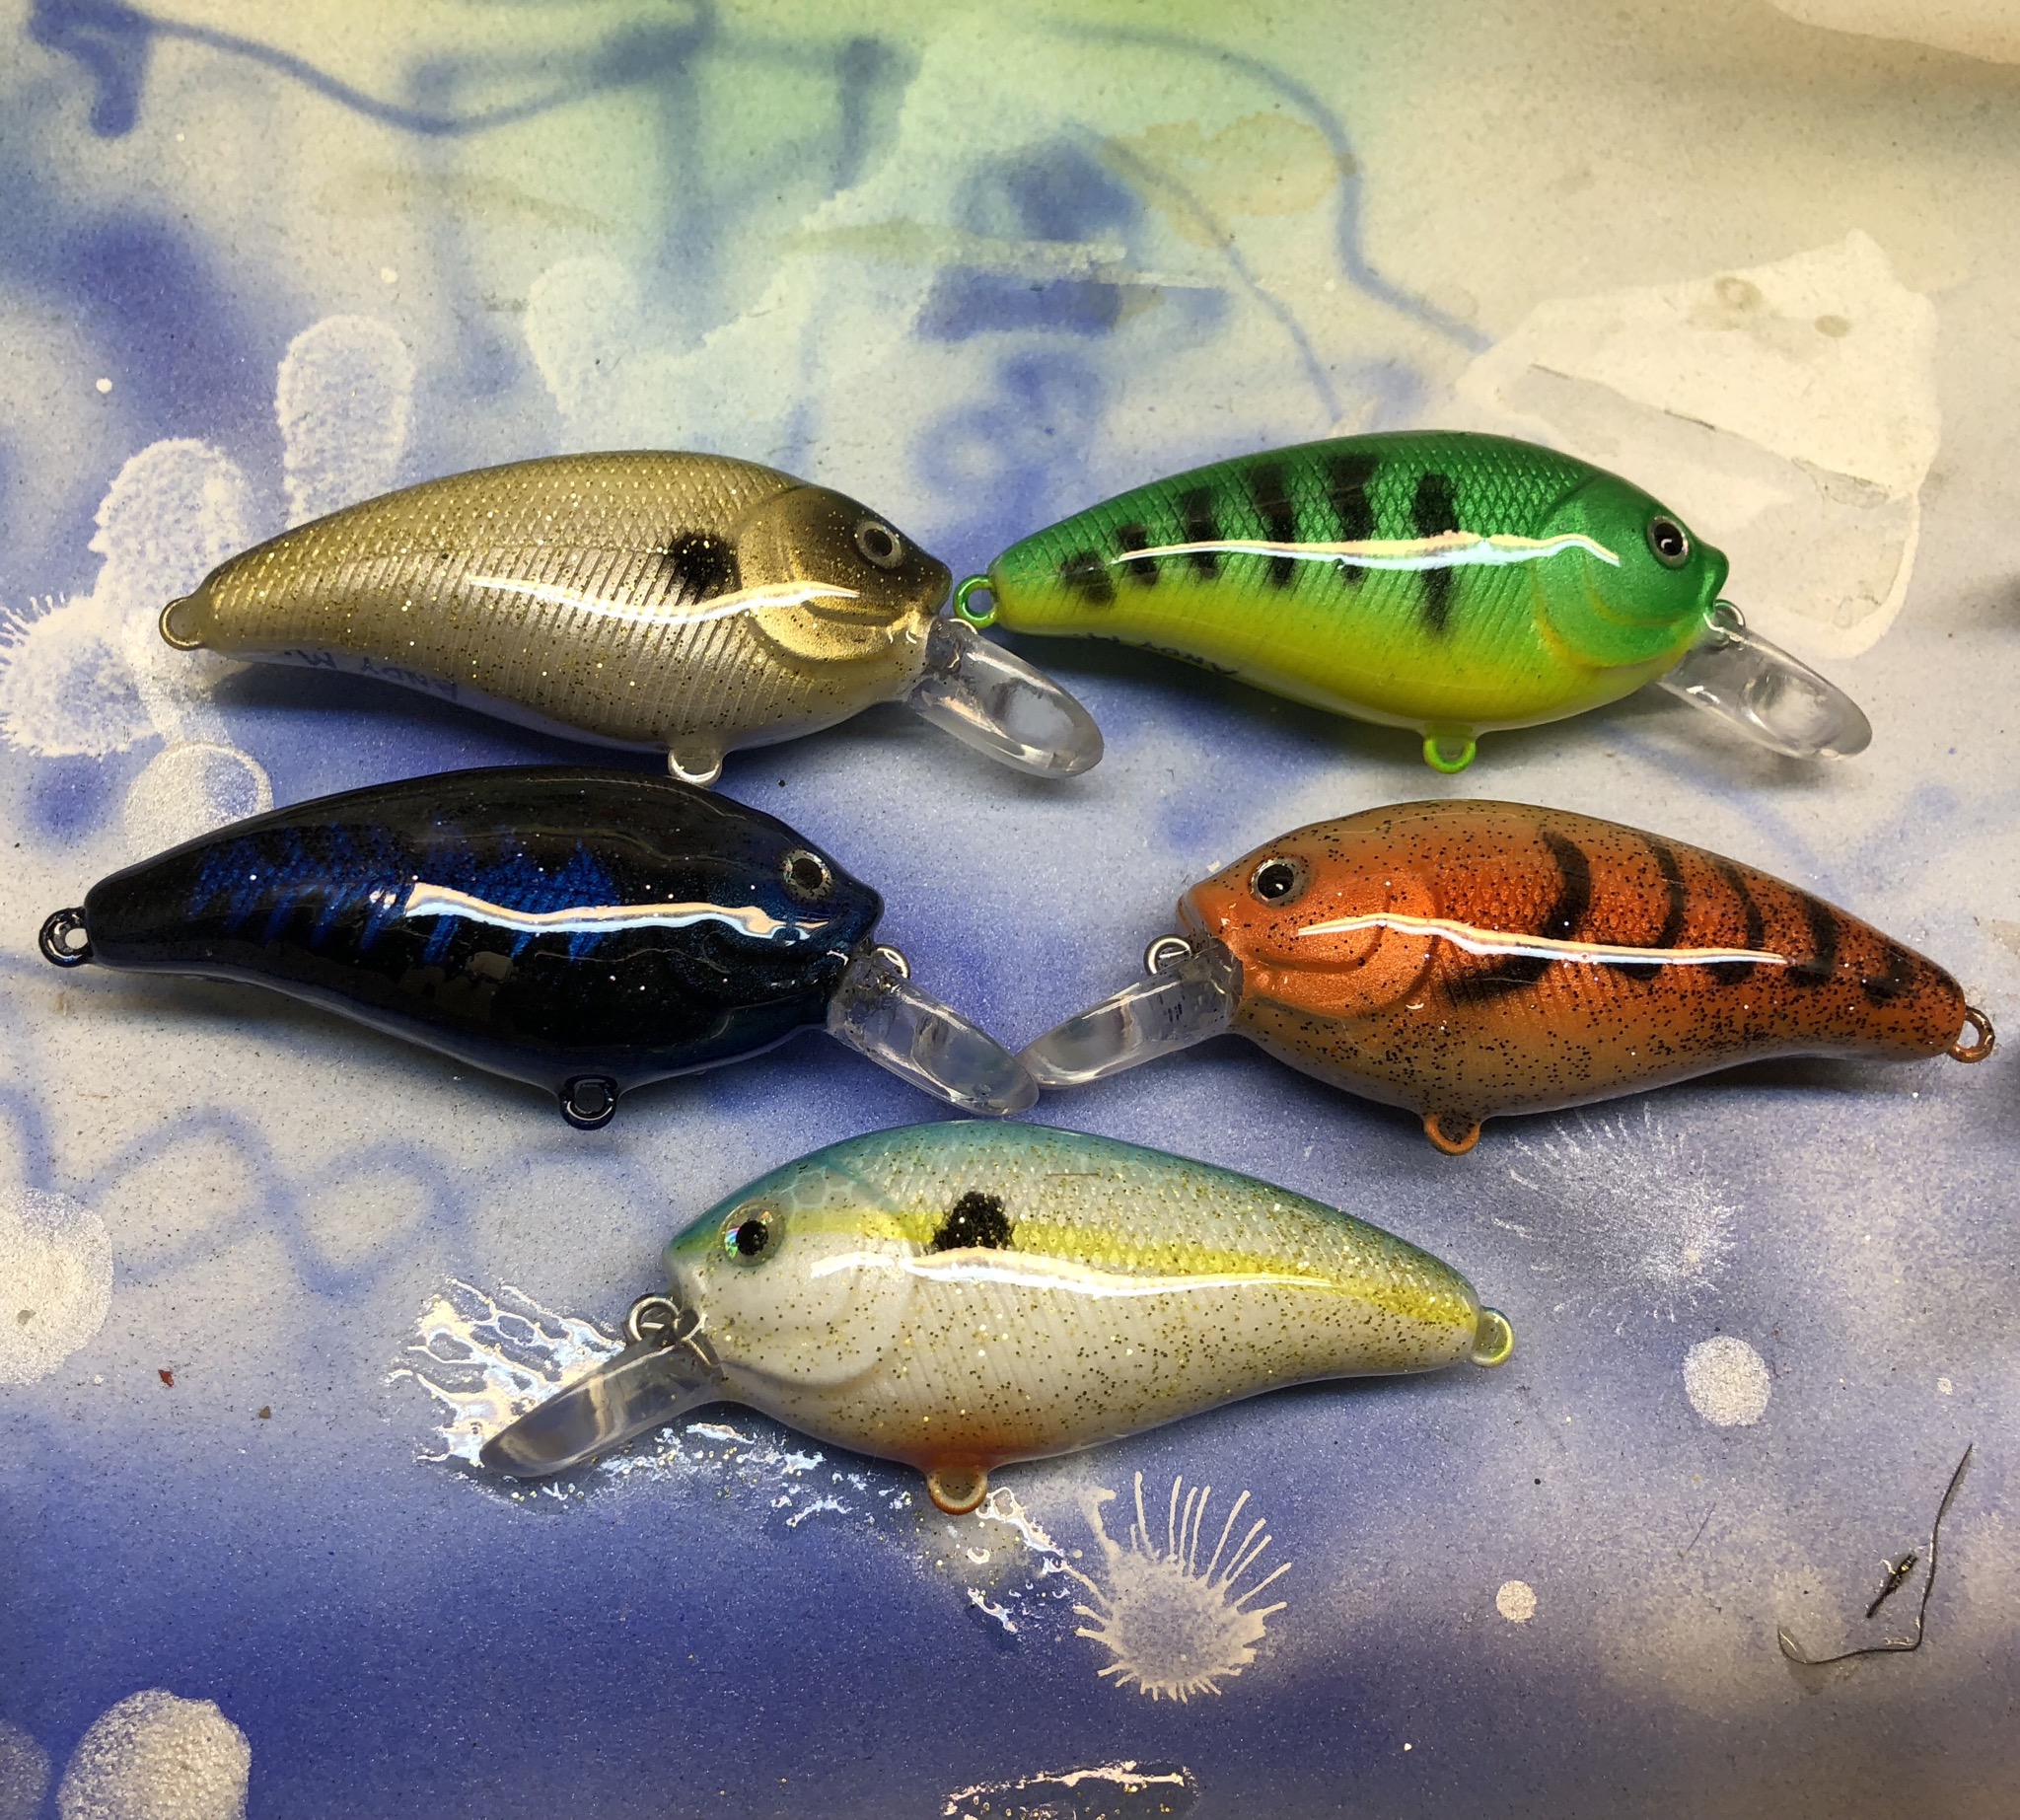 Best Brand or Type of airbrush paint for Painting hard bait fishing lures?  - Hard Baits -  - Tackle Building Forums